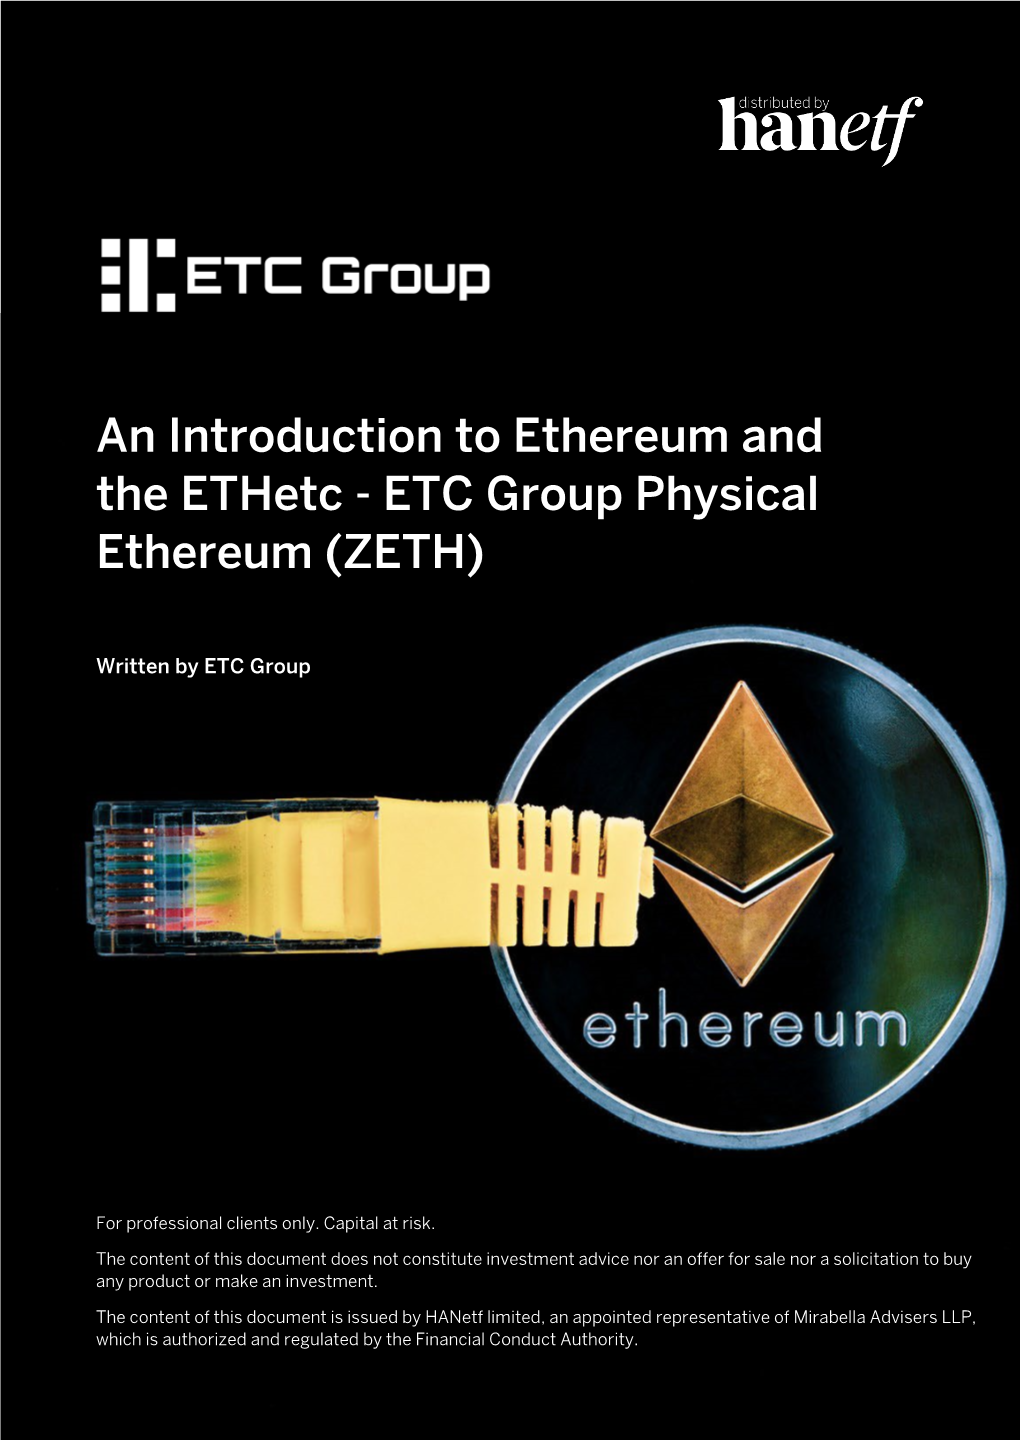 An Introduction to Ethereum and the Ethetc